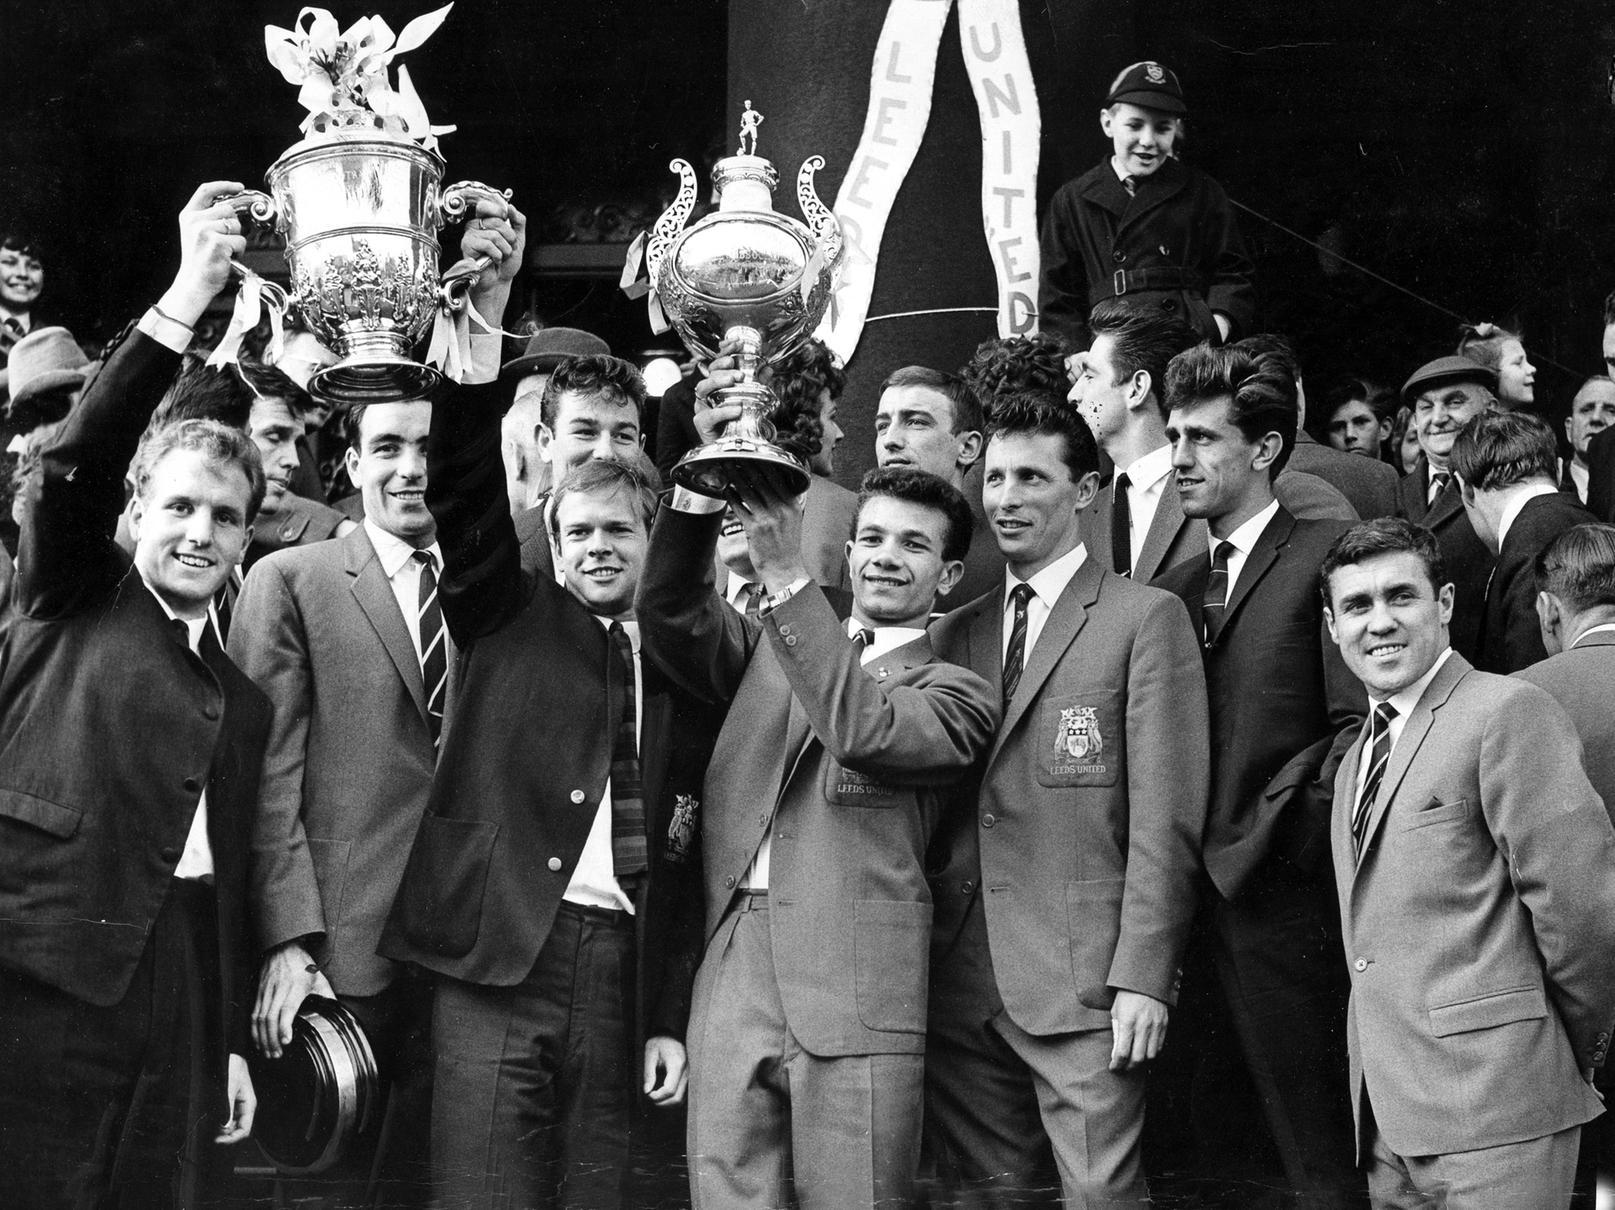 When Leeds United took first notable step in bid to emulate Real Madrid under Don Revie